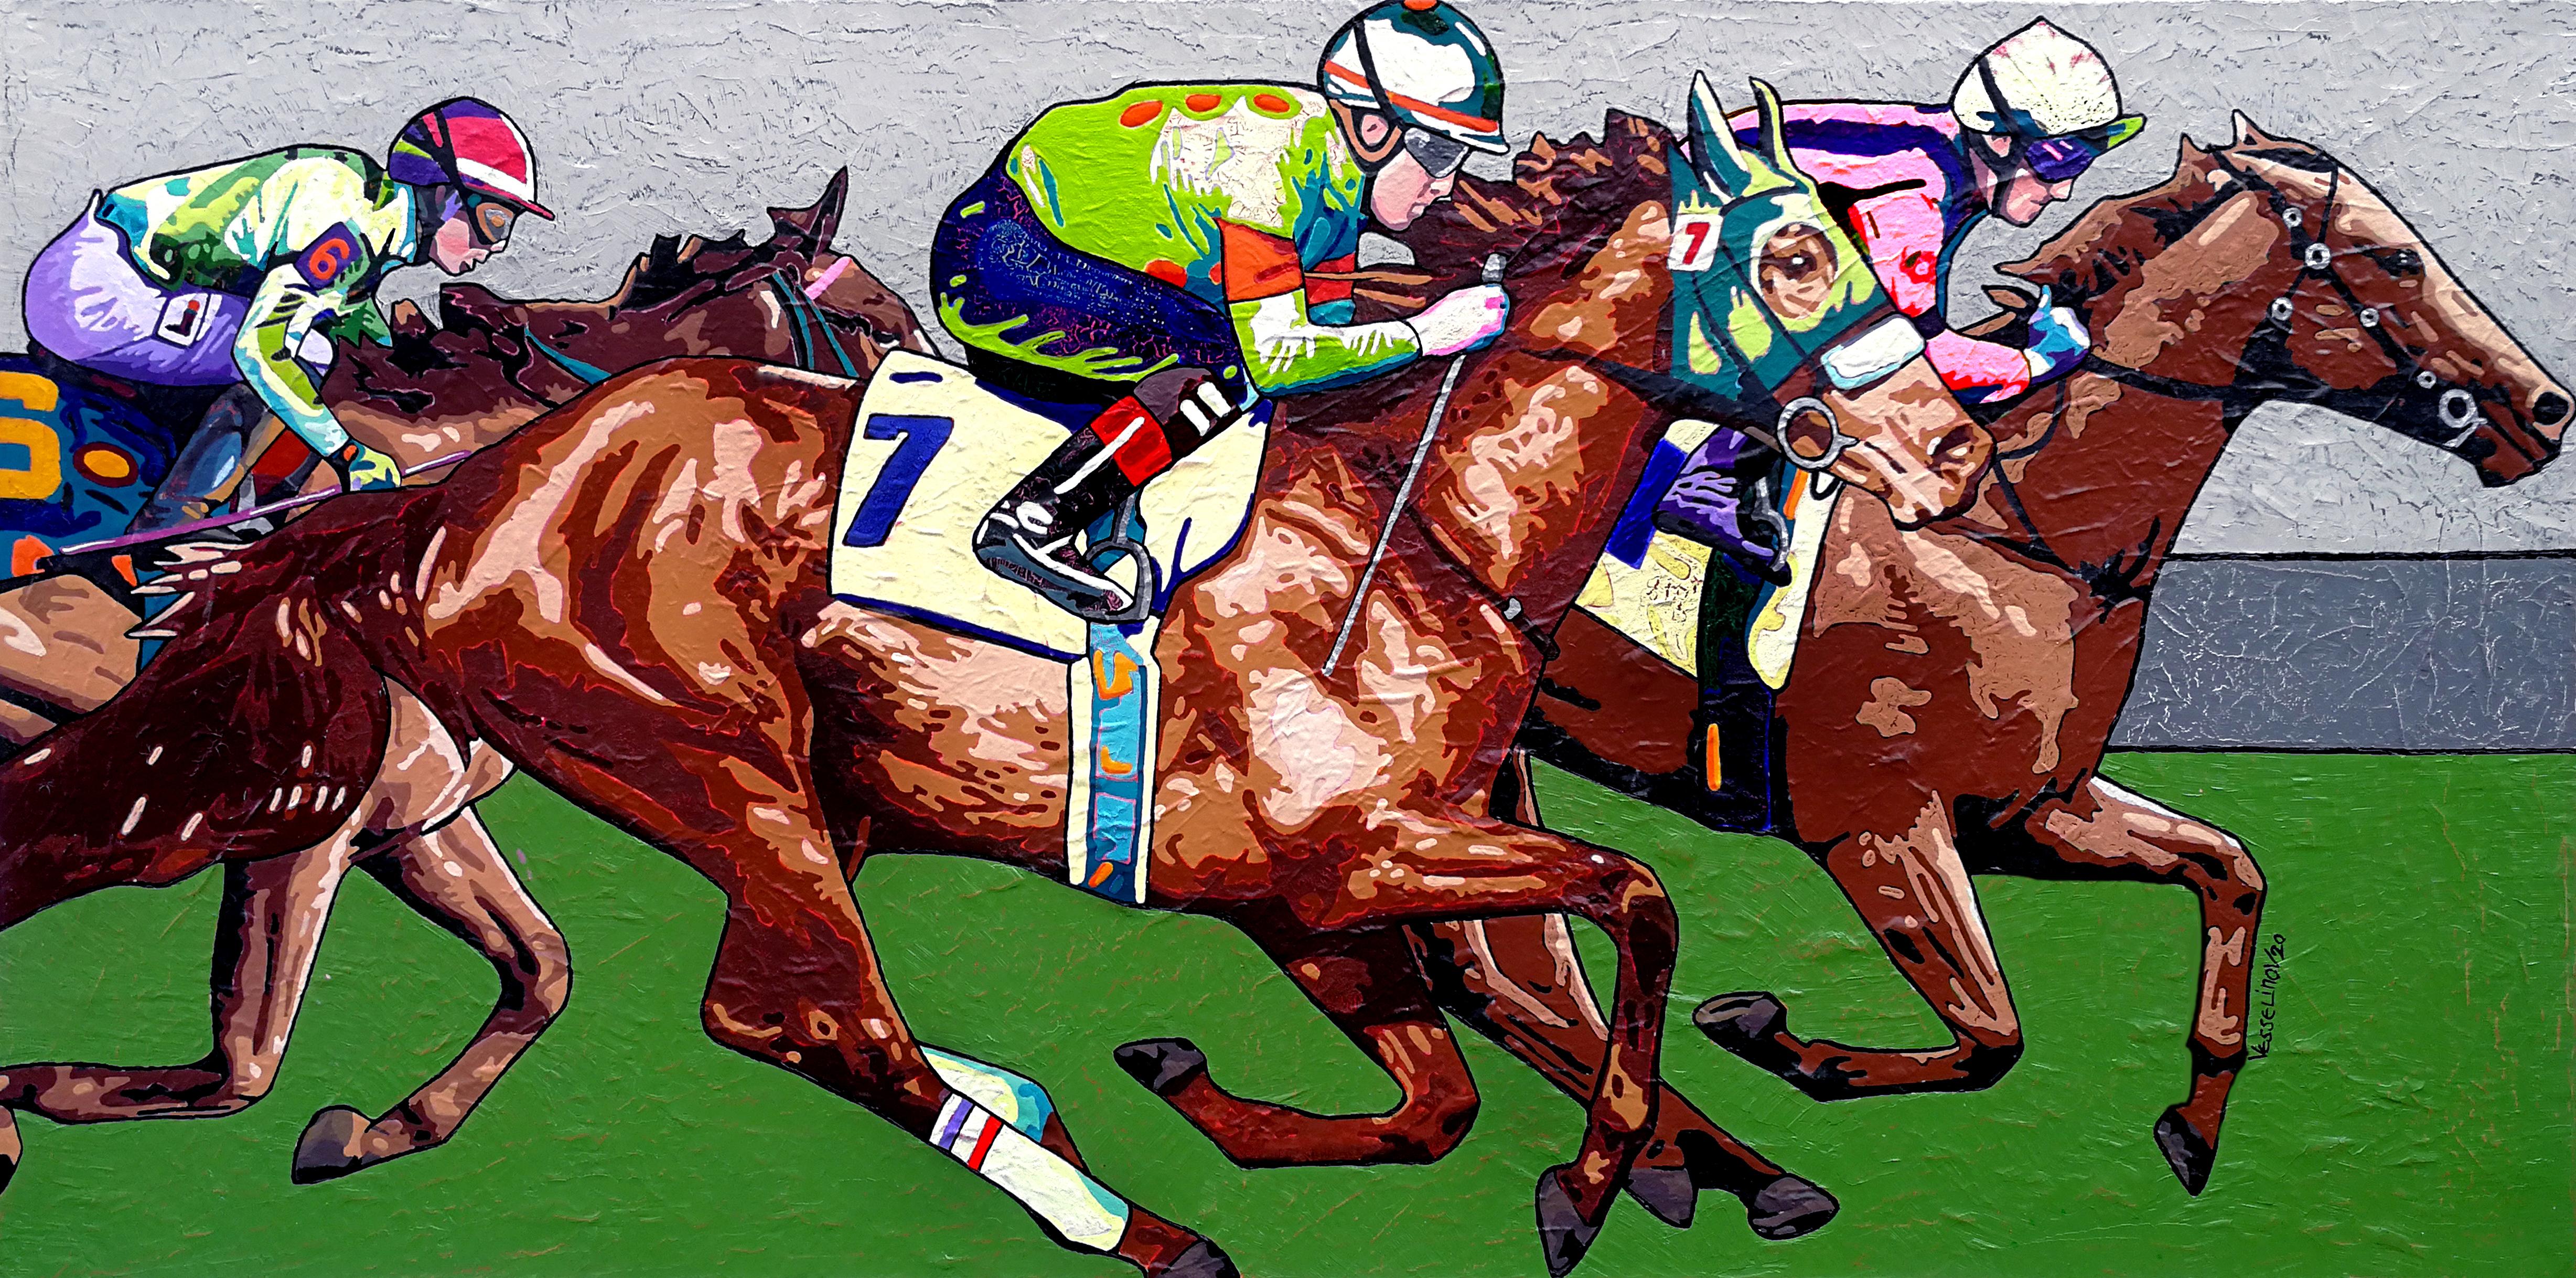 Wild Horses, The Race - Painting Brown White Orange Yellow Green Blue Pink Grey